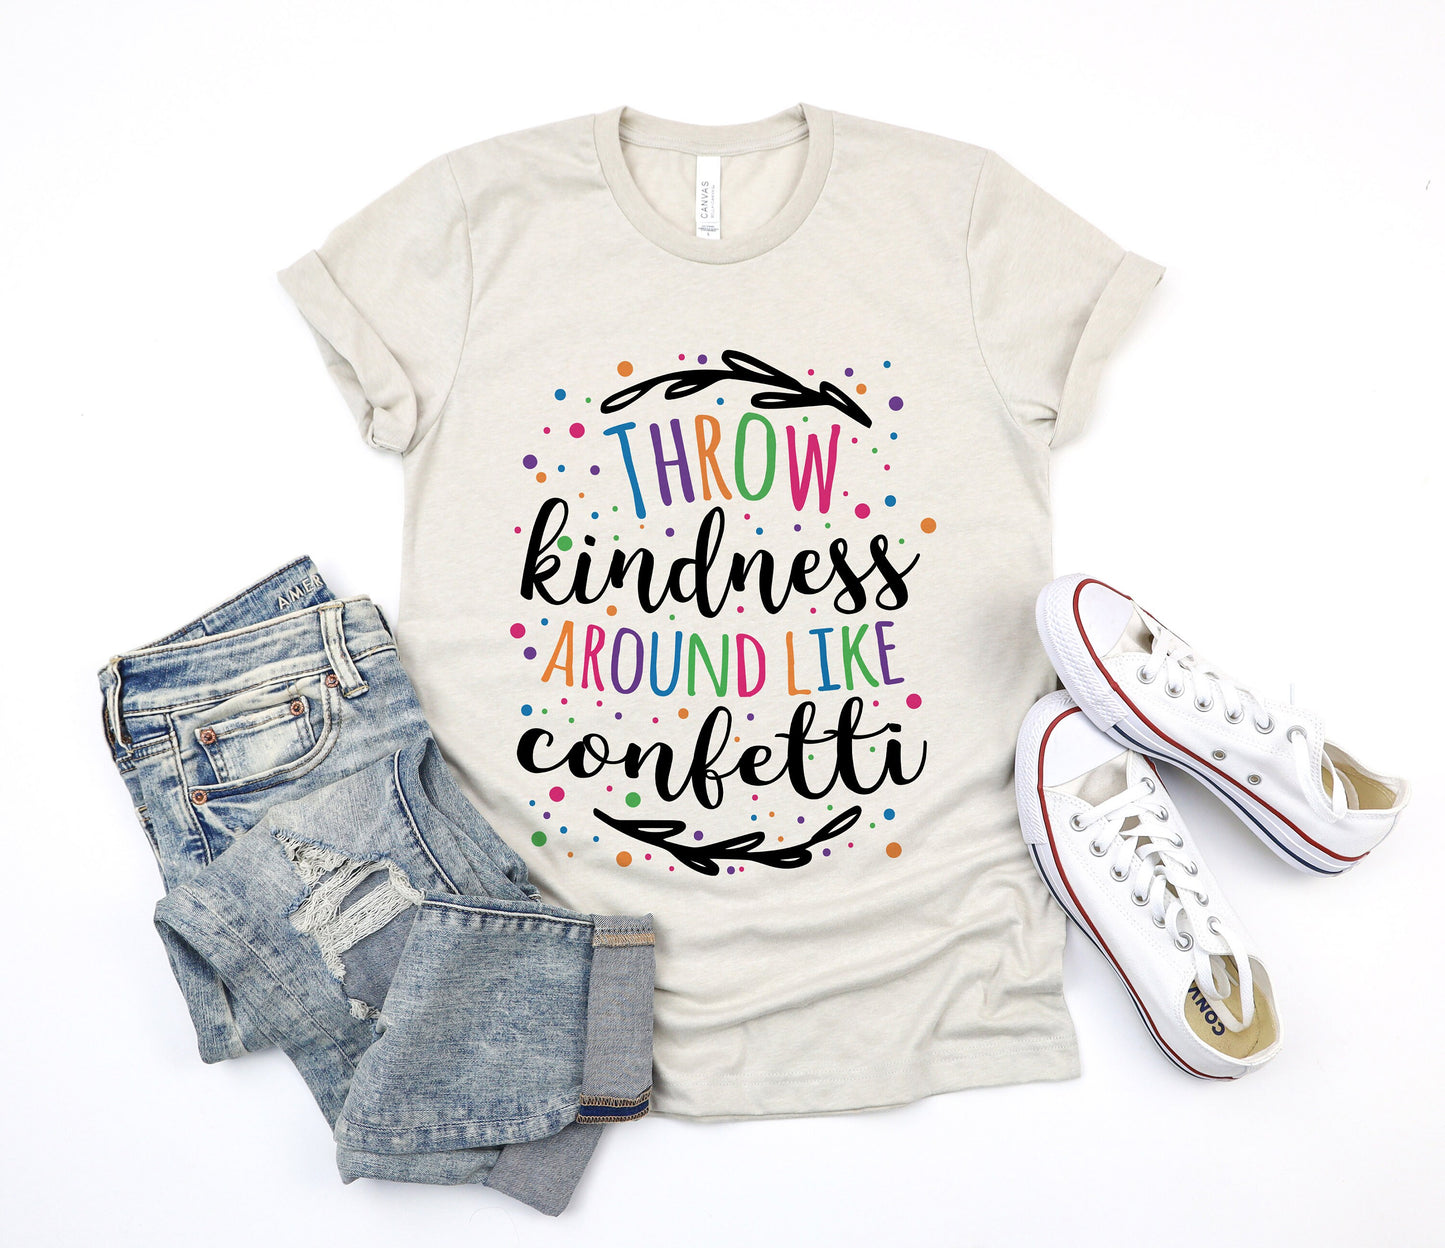 Throw Kindness Around Like Confetti Uplifting Ultra Soft Graphic Tee Unisex Soft Tee T-shirt for Women or Men